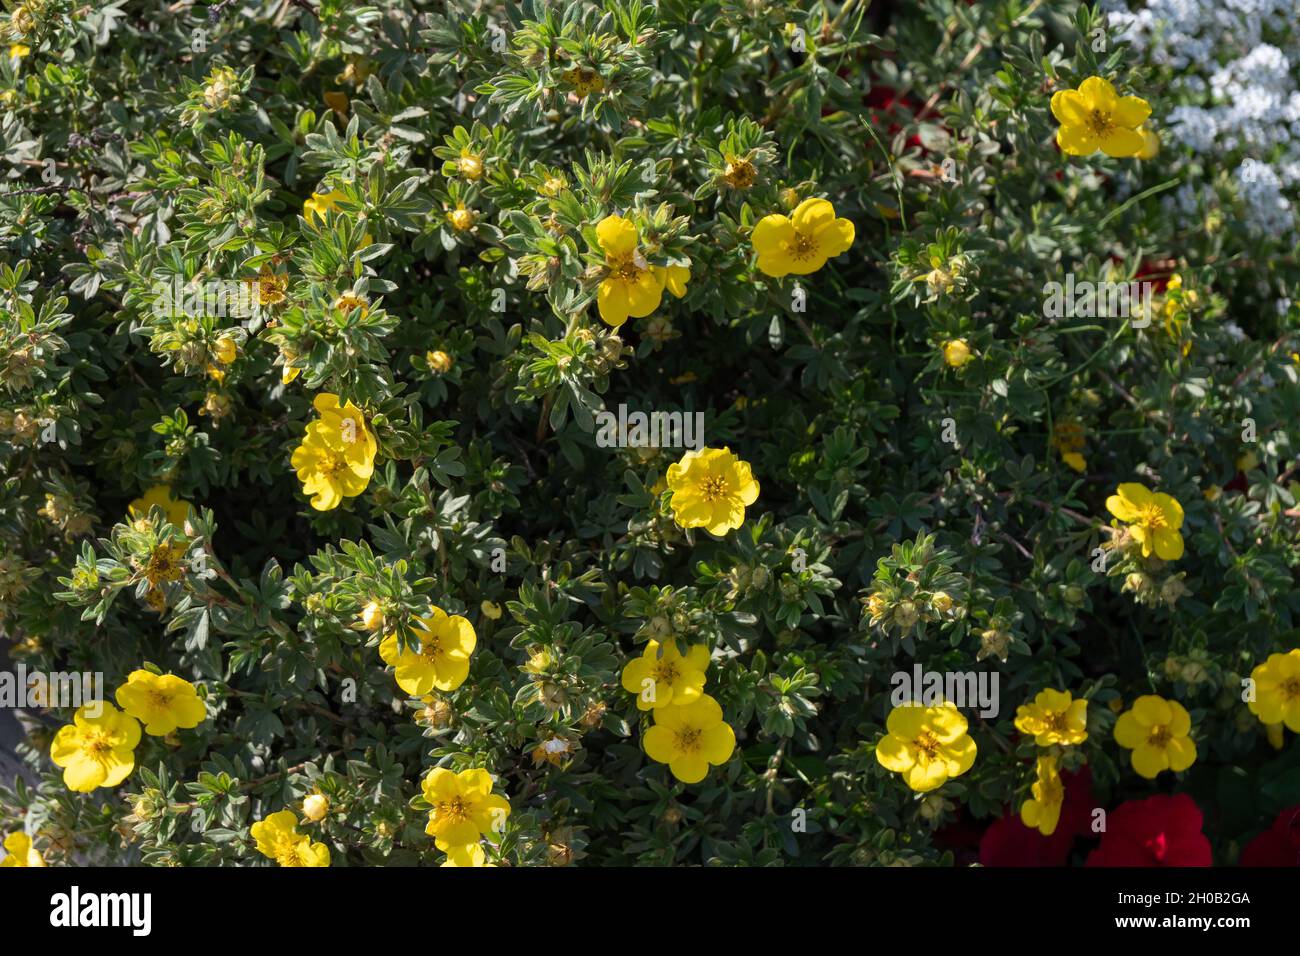 Blooming Kuril tea (Dasiphora Raf.) Or Potentilla L. or Pentaphylloides fruticosa on a sunny summer day. Stock Photo